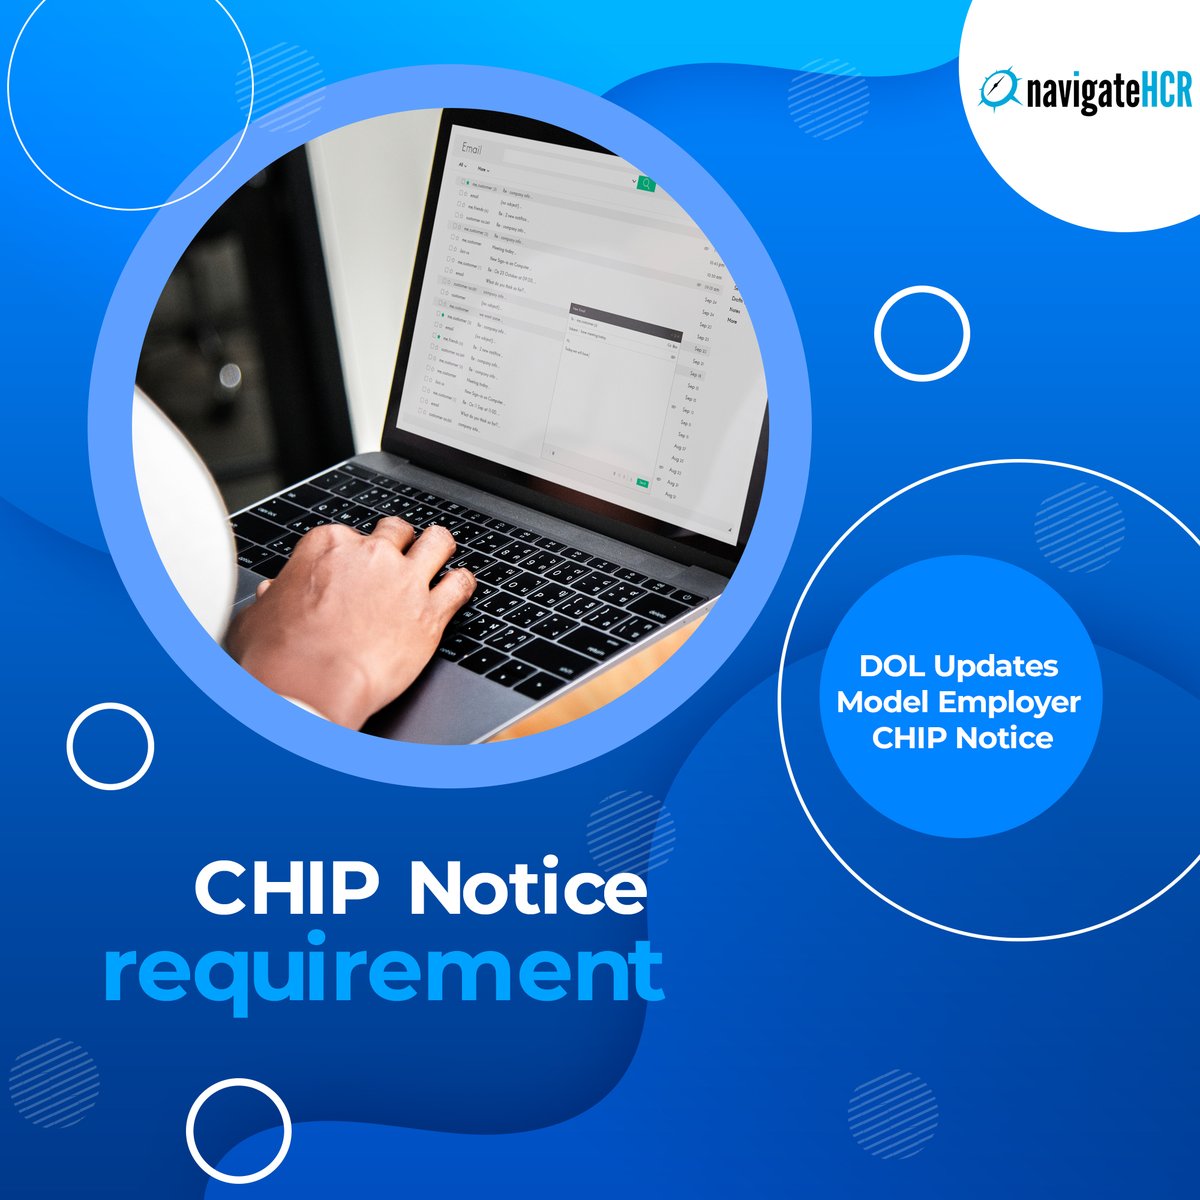 Are you aware of the annual notice requirement under CHIPRA? Employers maintaining group health plans in states offering premium assistance subsidies must take note. Stay compliant with the latest model Employer CHIP Notice. navigatehcr.ubpages.com

#NHCR #ComplianceUpdates